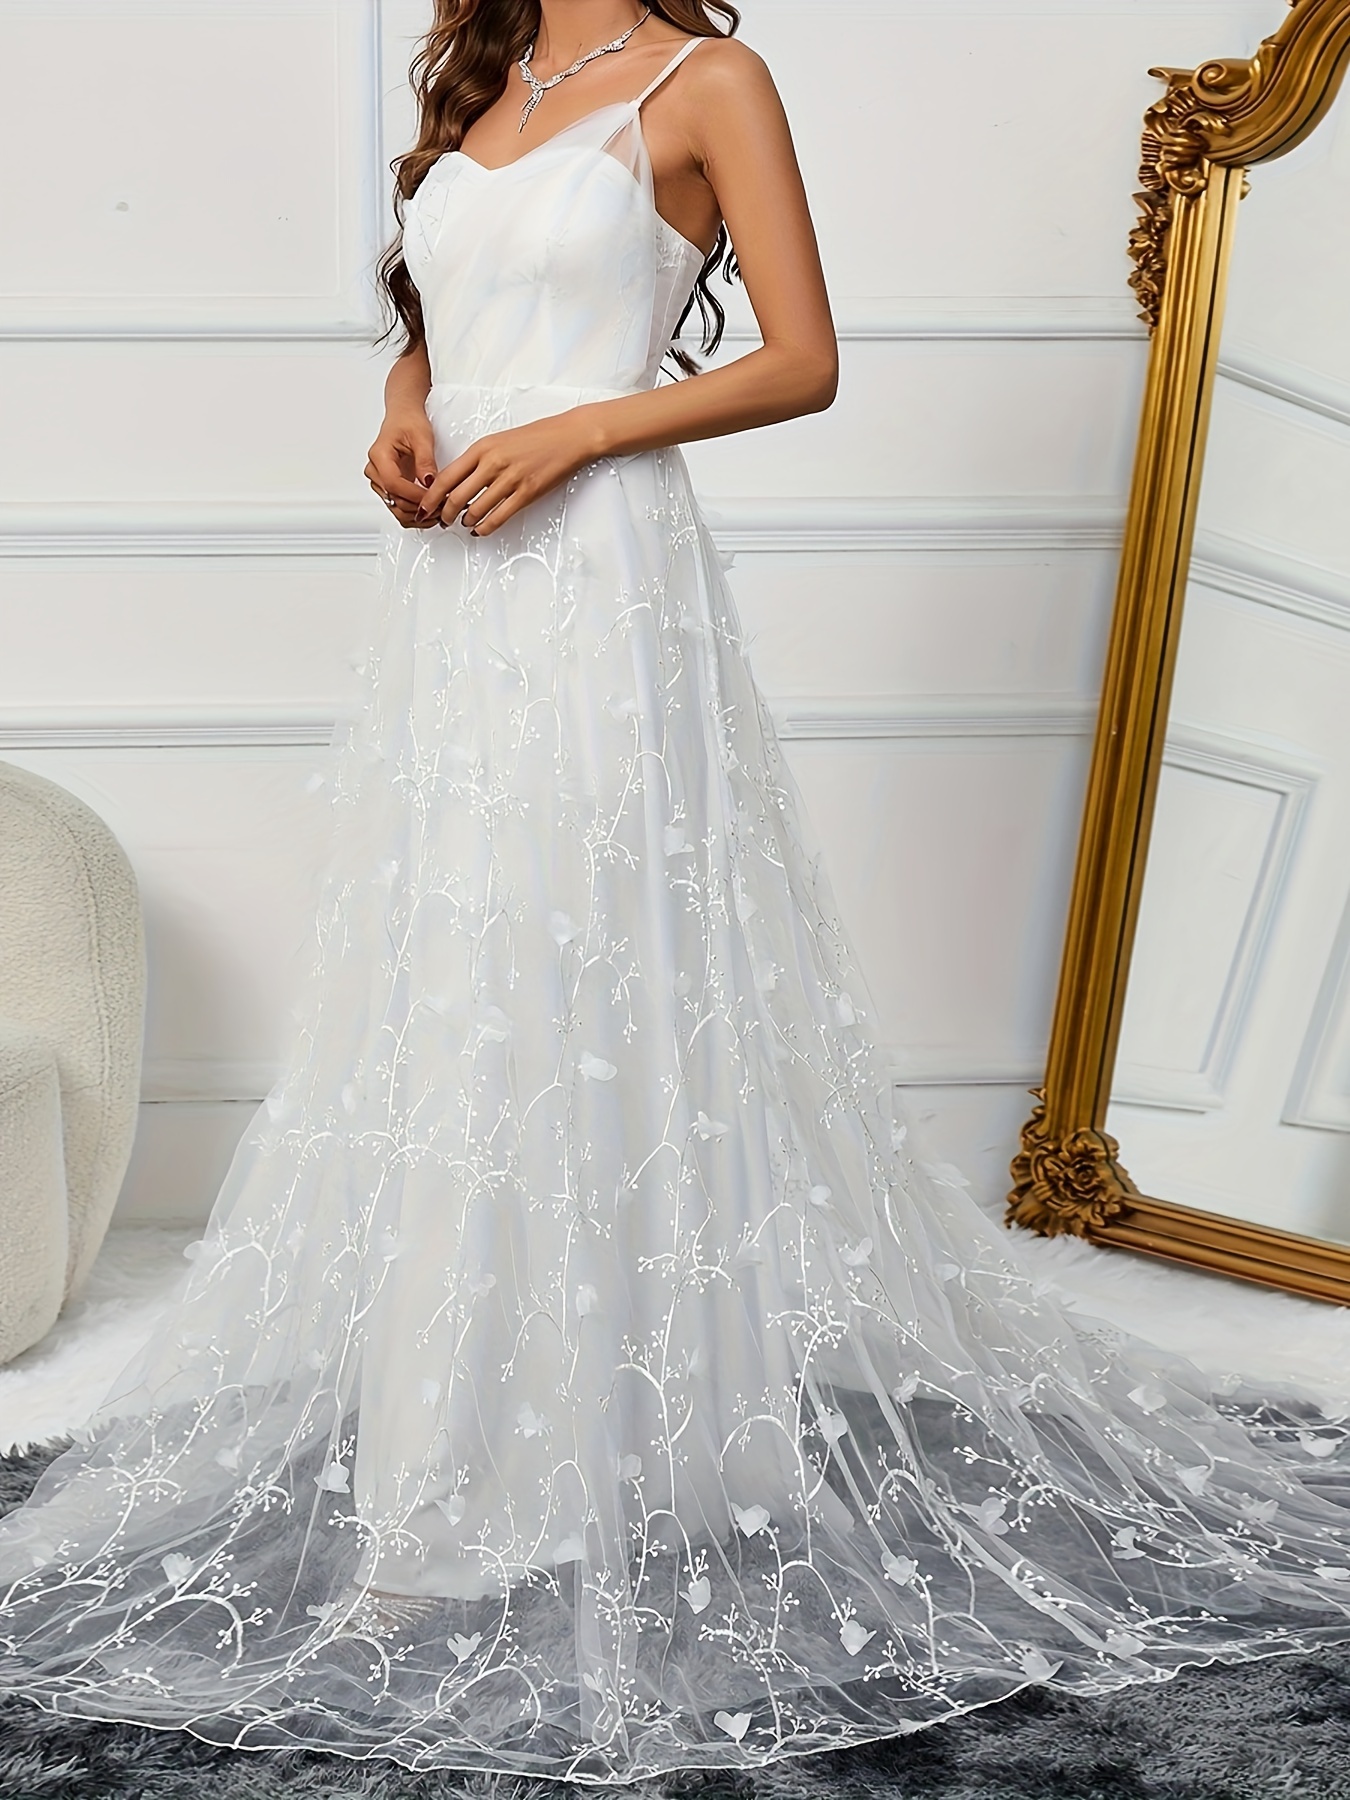 Dropship Summer Bridal Wedding Dress Deep V-neck Sleeveless Backless  Bandage Sling Lace Dresses to Sell Online at a Lower Price